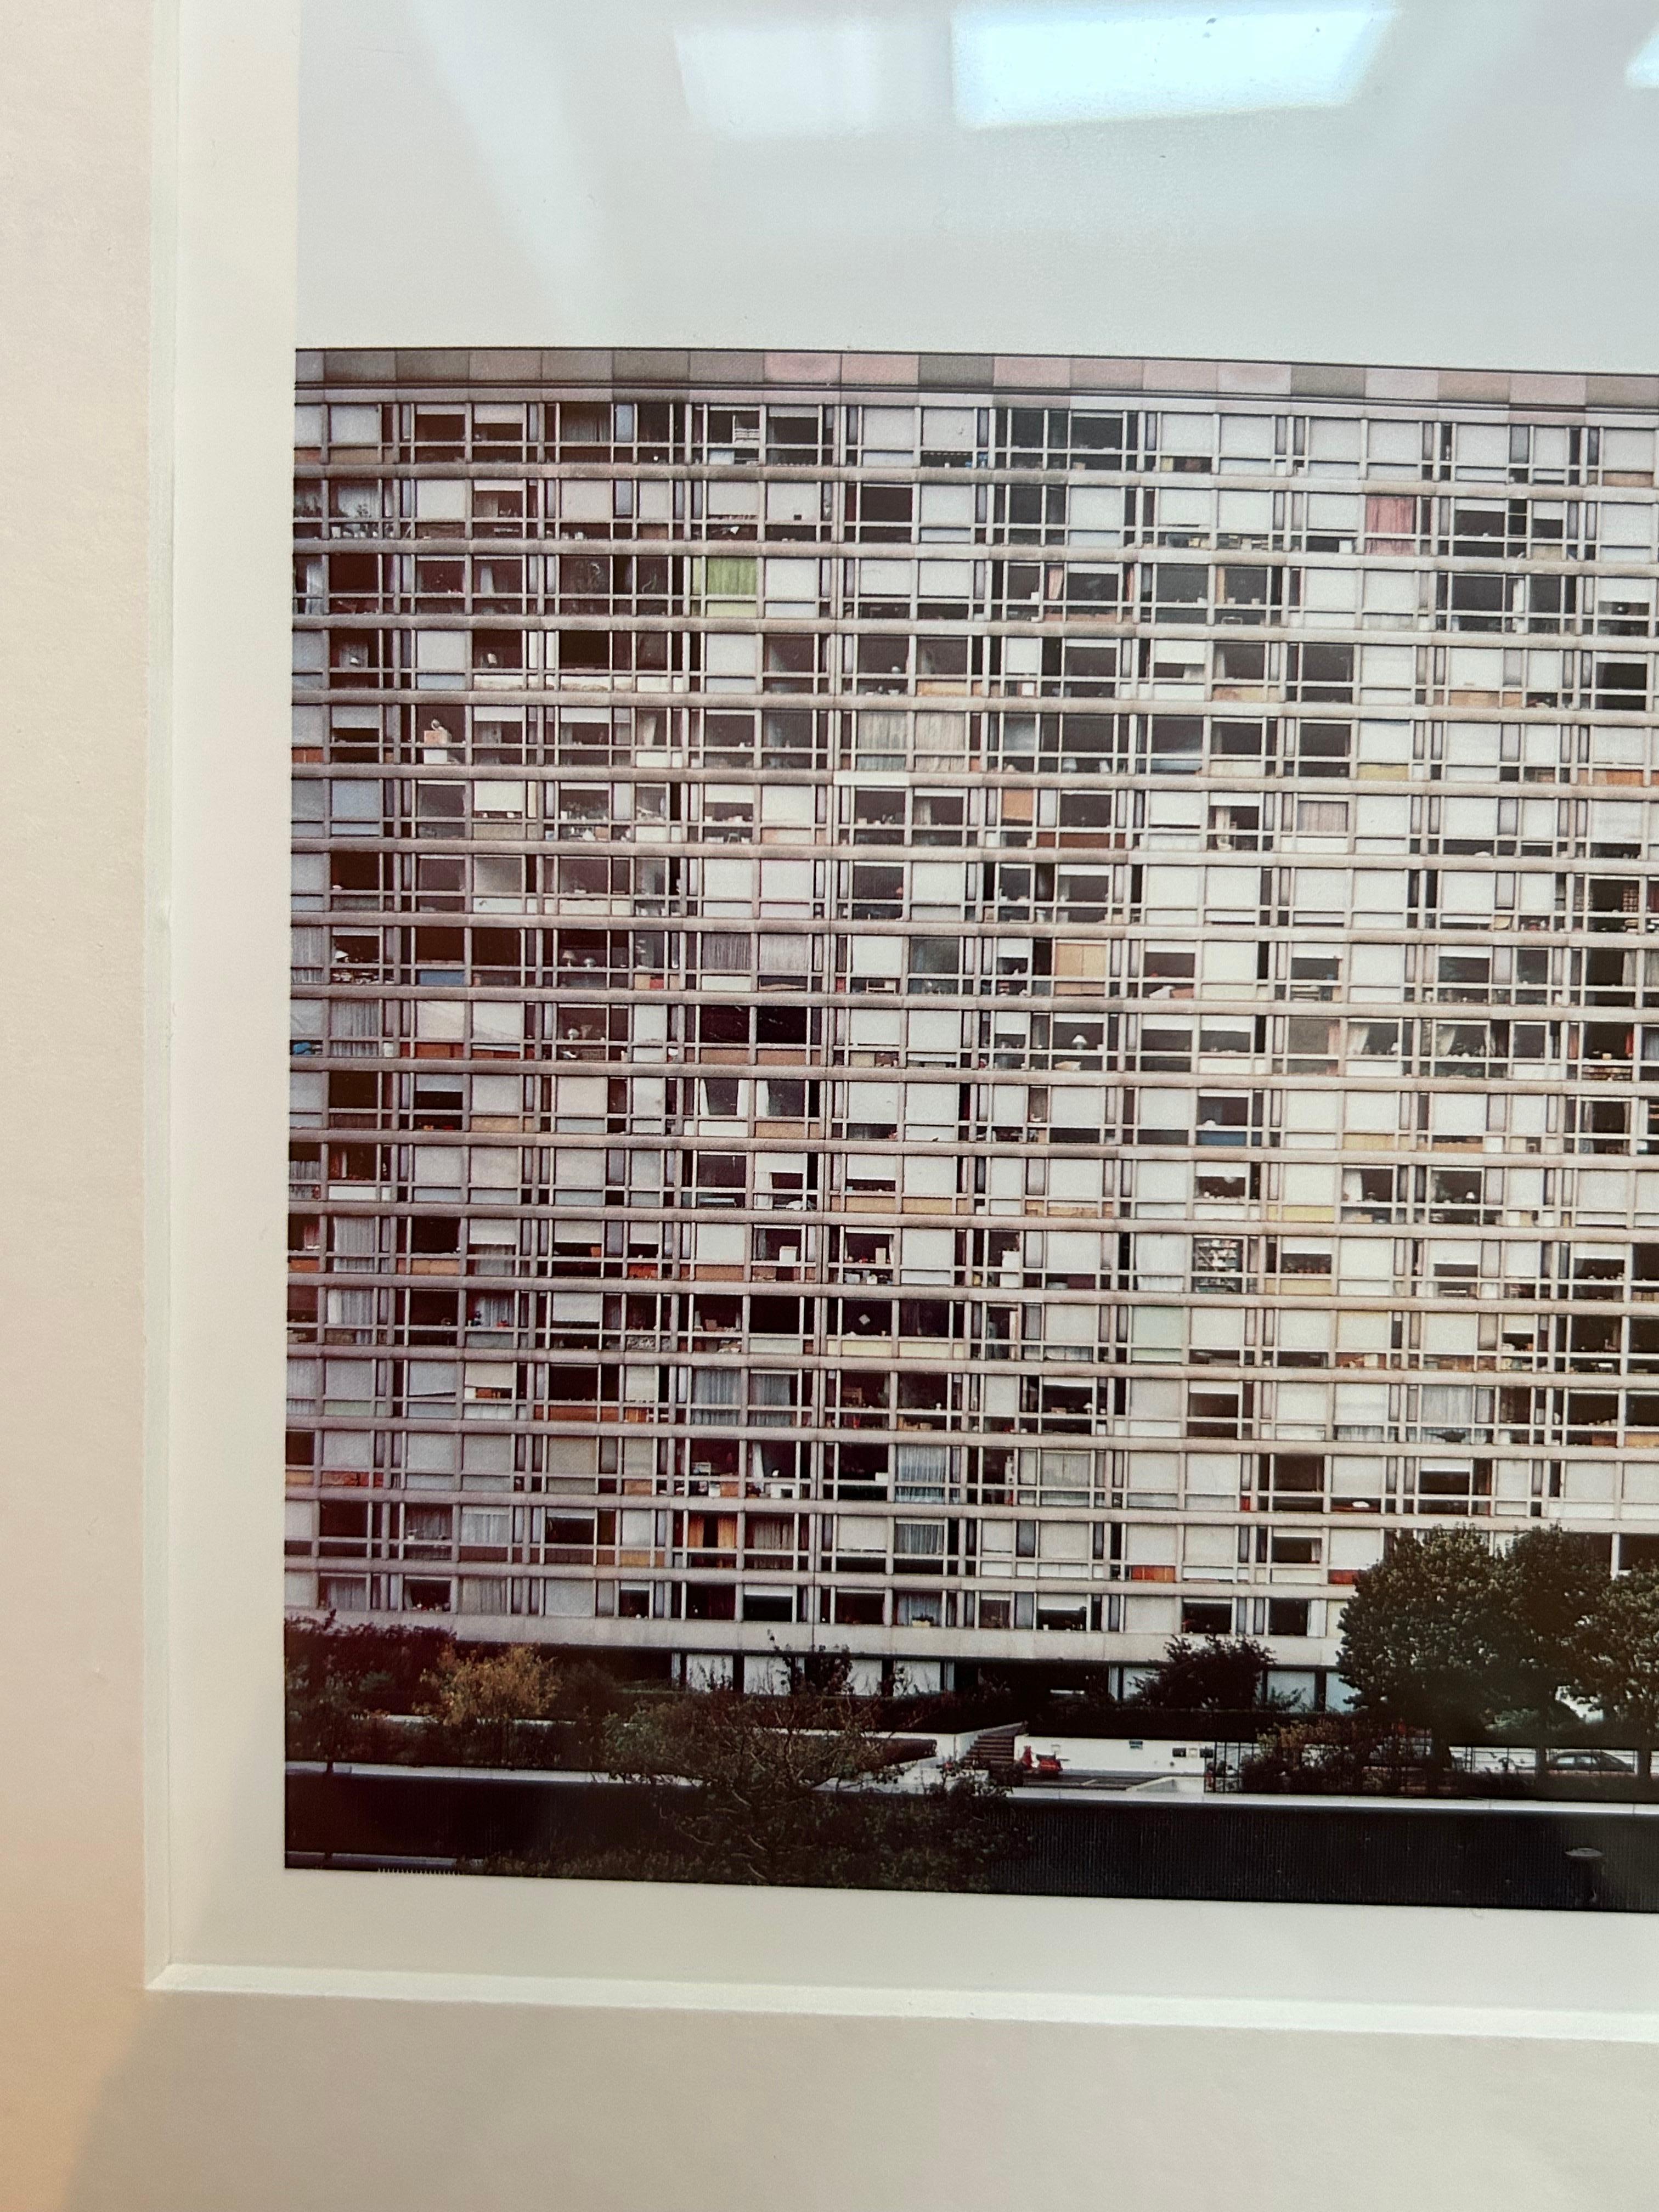 Vintage Andreas Gursky “Montparnasse” Lithograph, Signed, Germany, 1995 For Sale 2